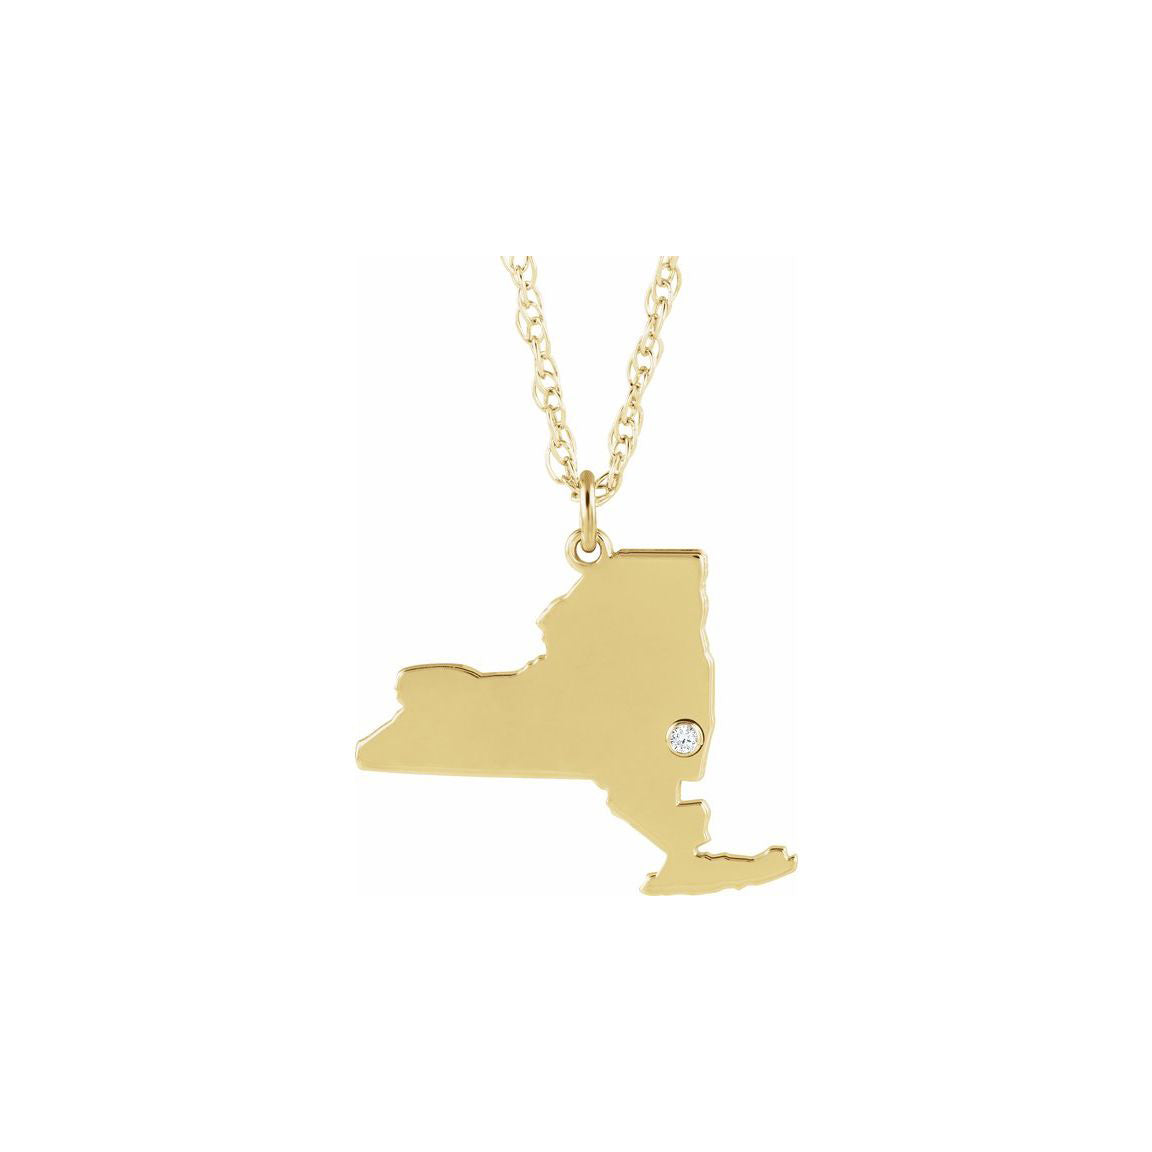 10K Yellow Gold Solid Louisiana State Pendant Charm Necklace